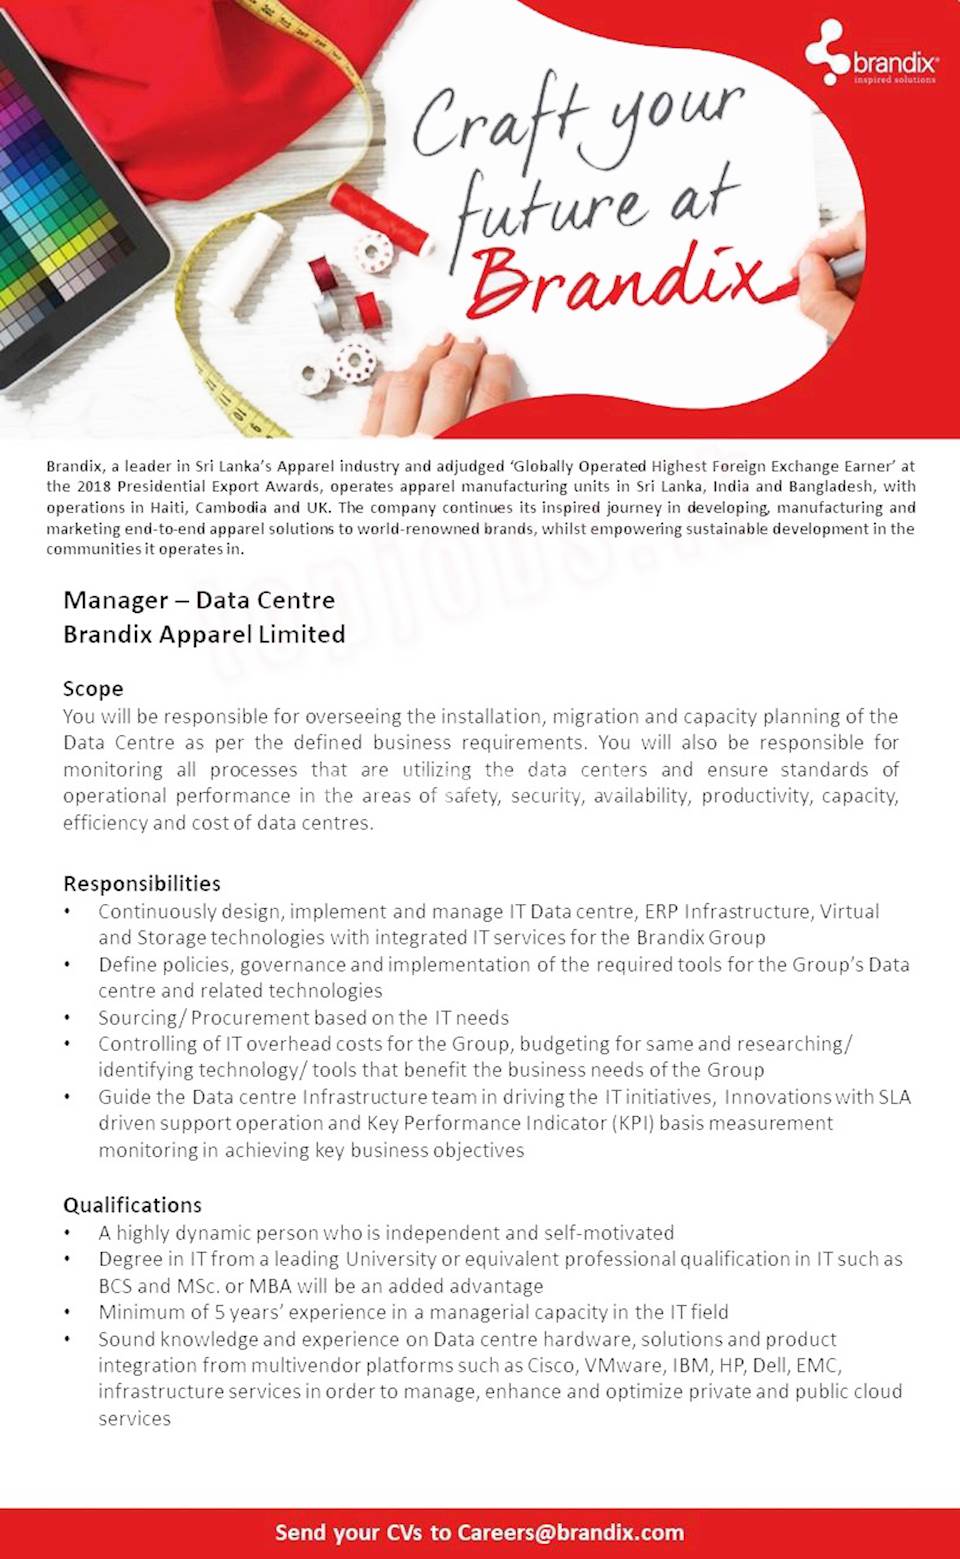 Manager - Data Centre